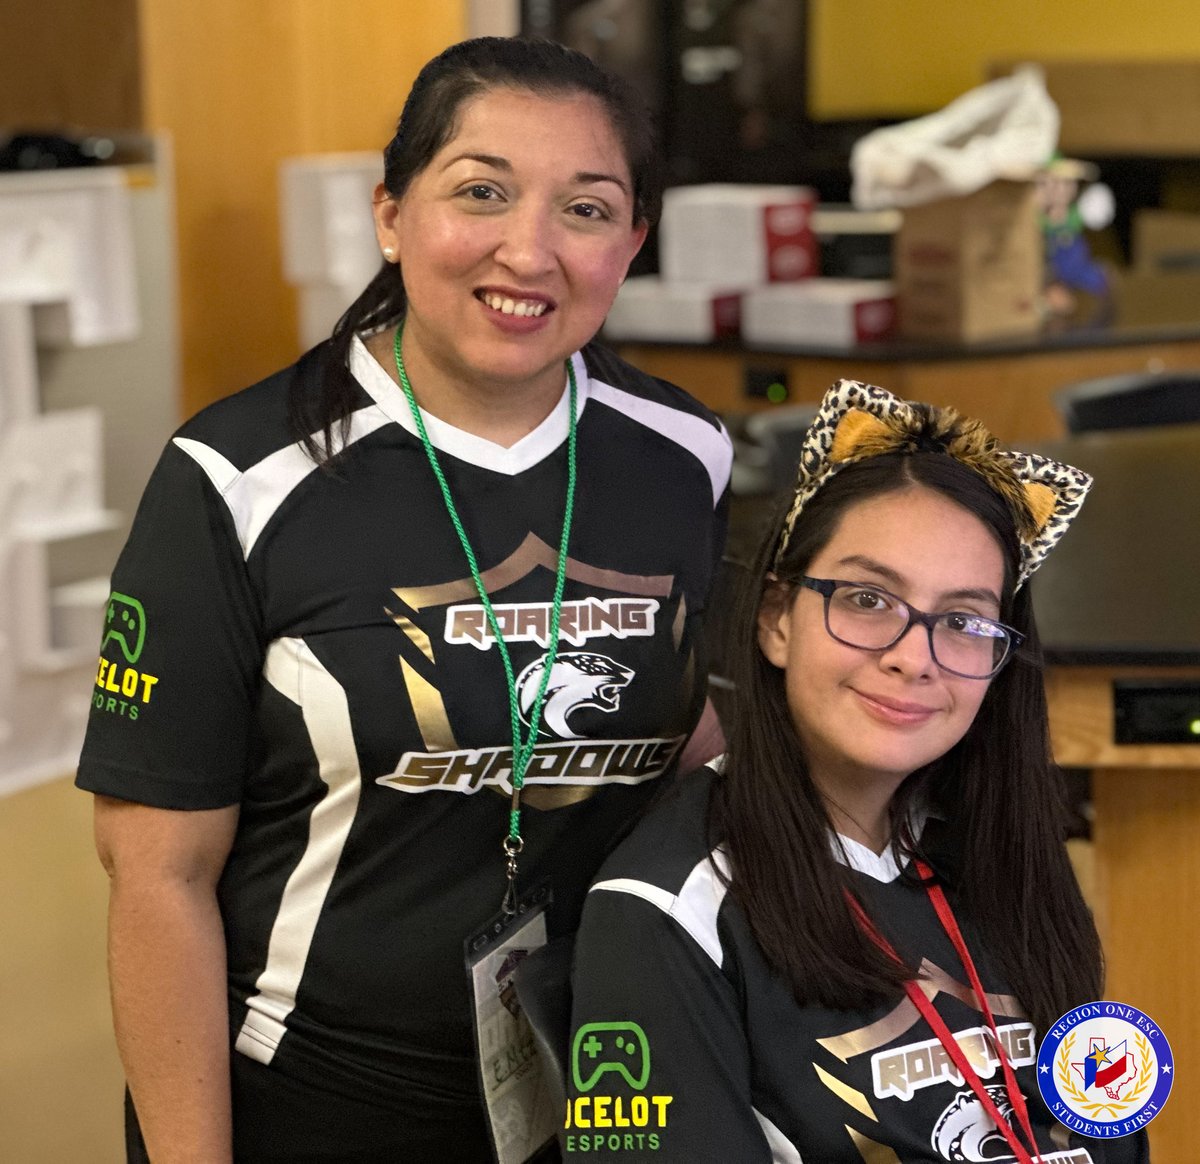 🎮 Thanks for playing! We had a blast watching students show off their skills in our first elementary esports tournament. In the end, @EdinburgCISD emerged victorious - earning the title of our first elementary esports champions in BOTH #MarioKart and #SuperSmashBros. Congrats!